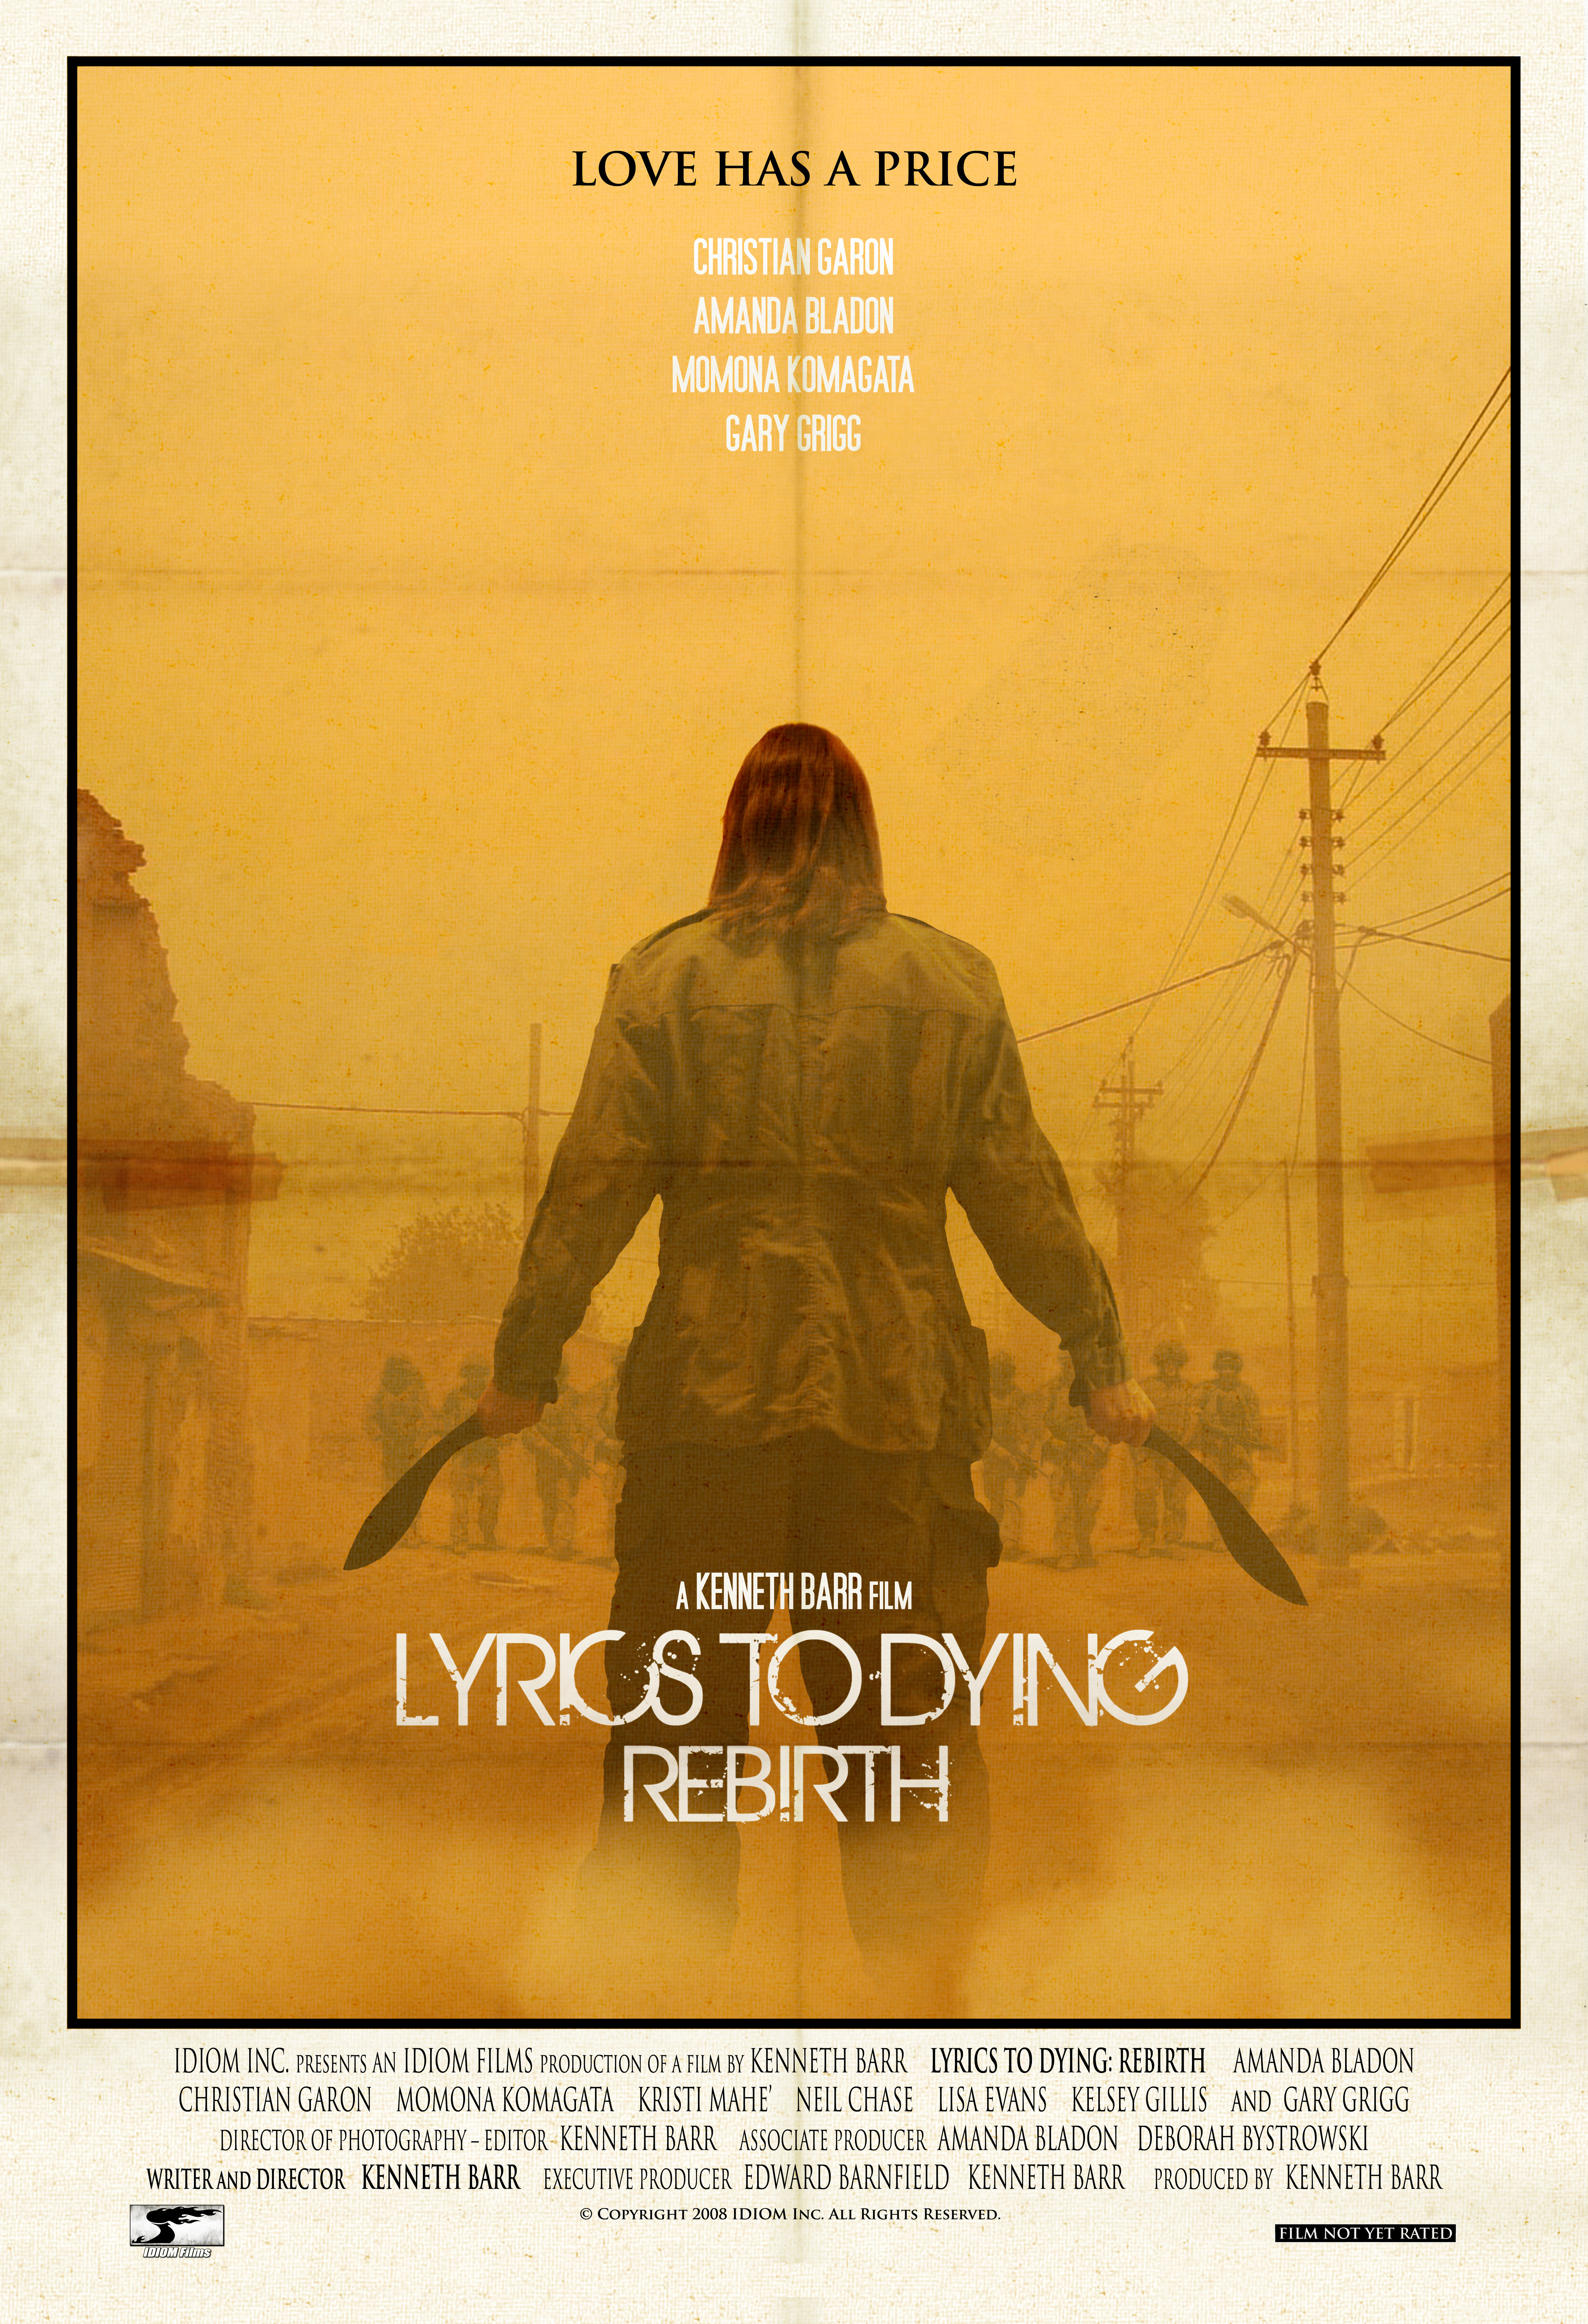 Promotional poster art for Lyrics To Dying Rebirth.